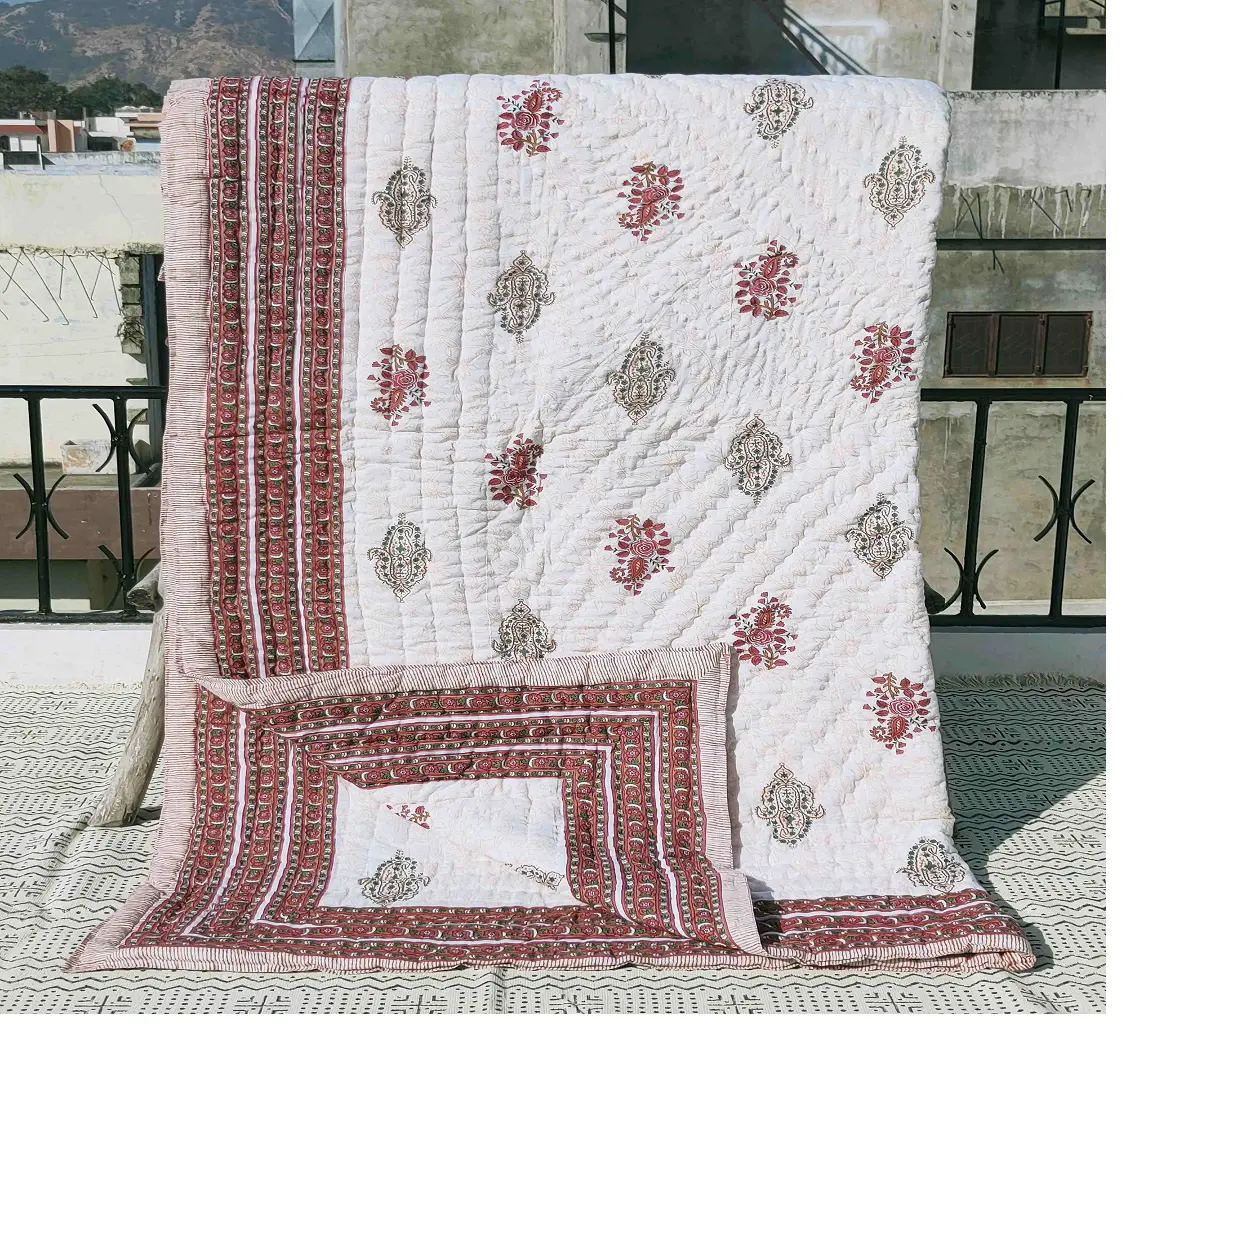 double sided fine border design hand block printed cotton quilts for home decor stores and home textile stores for resale